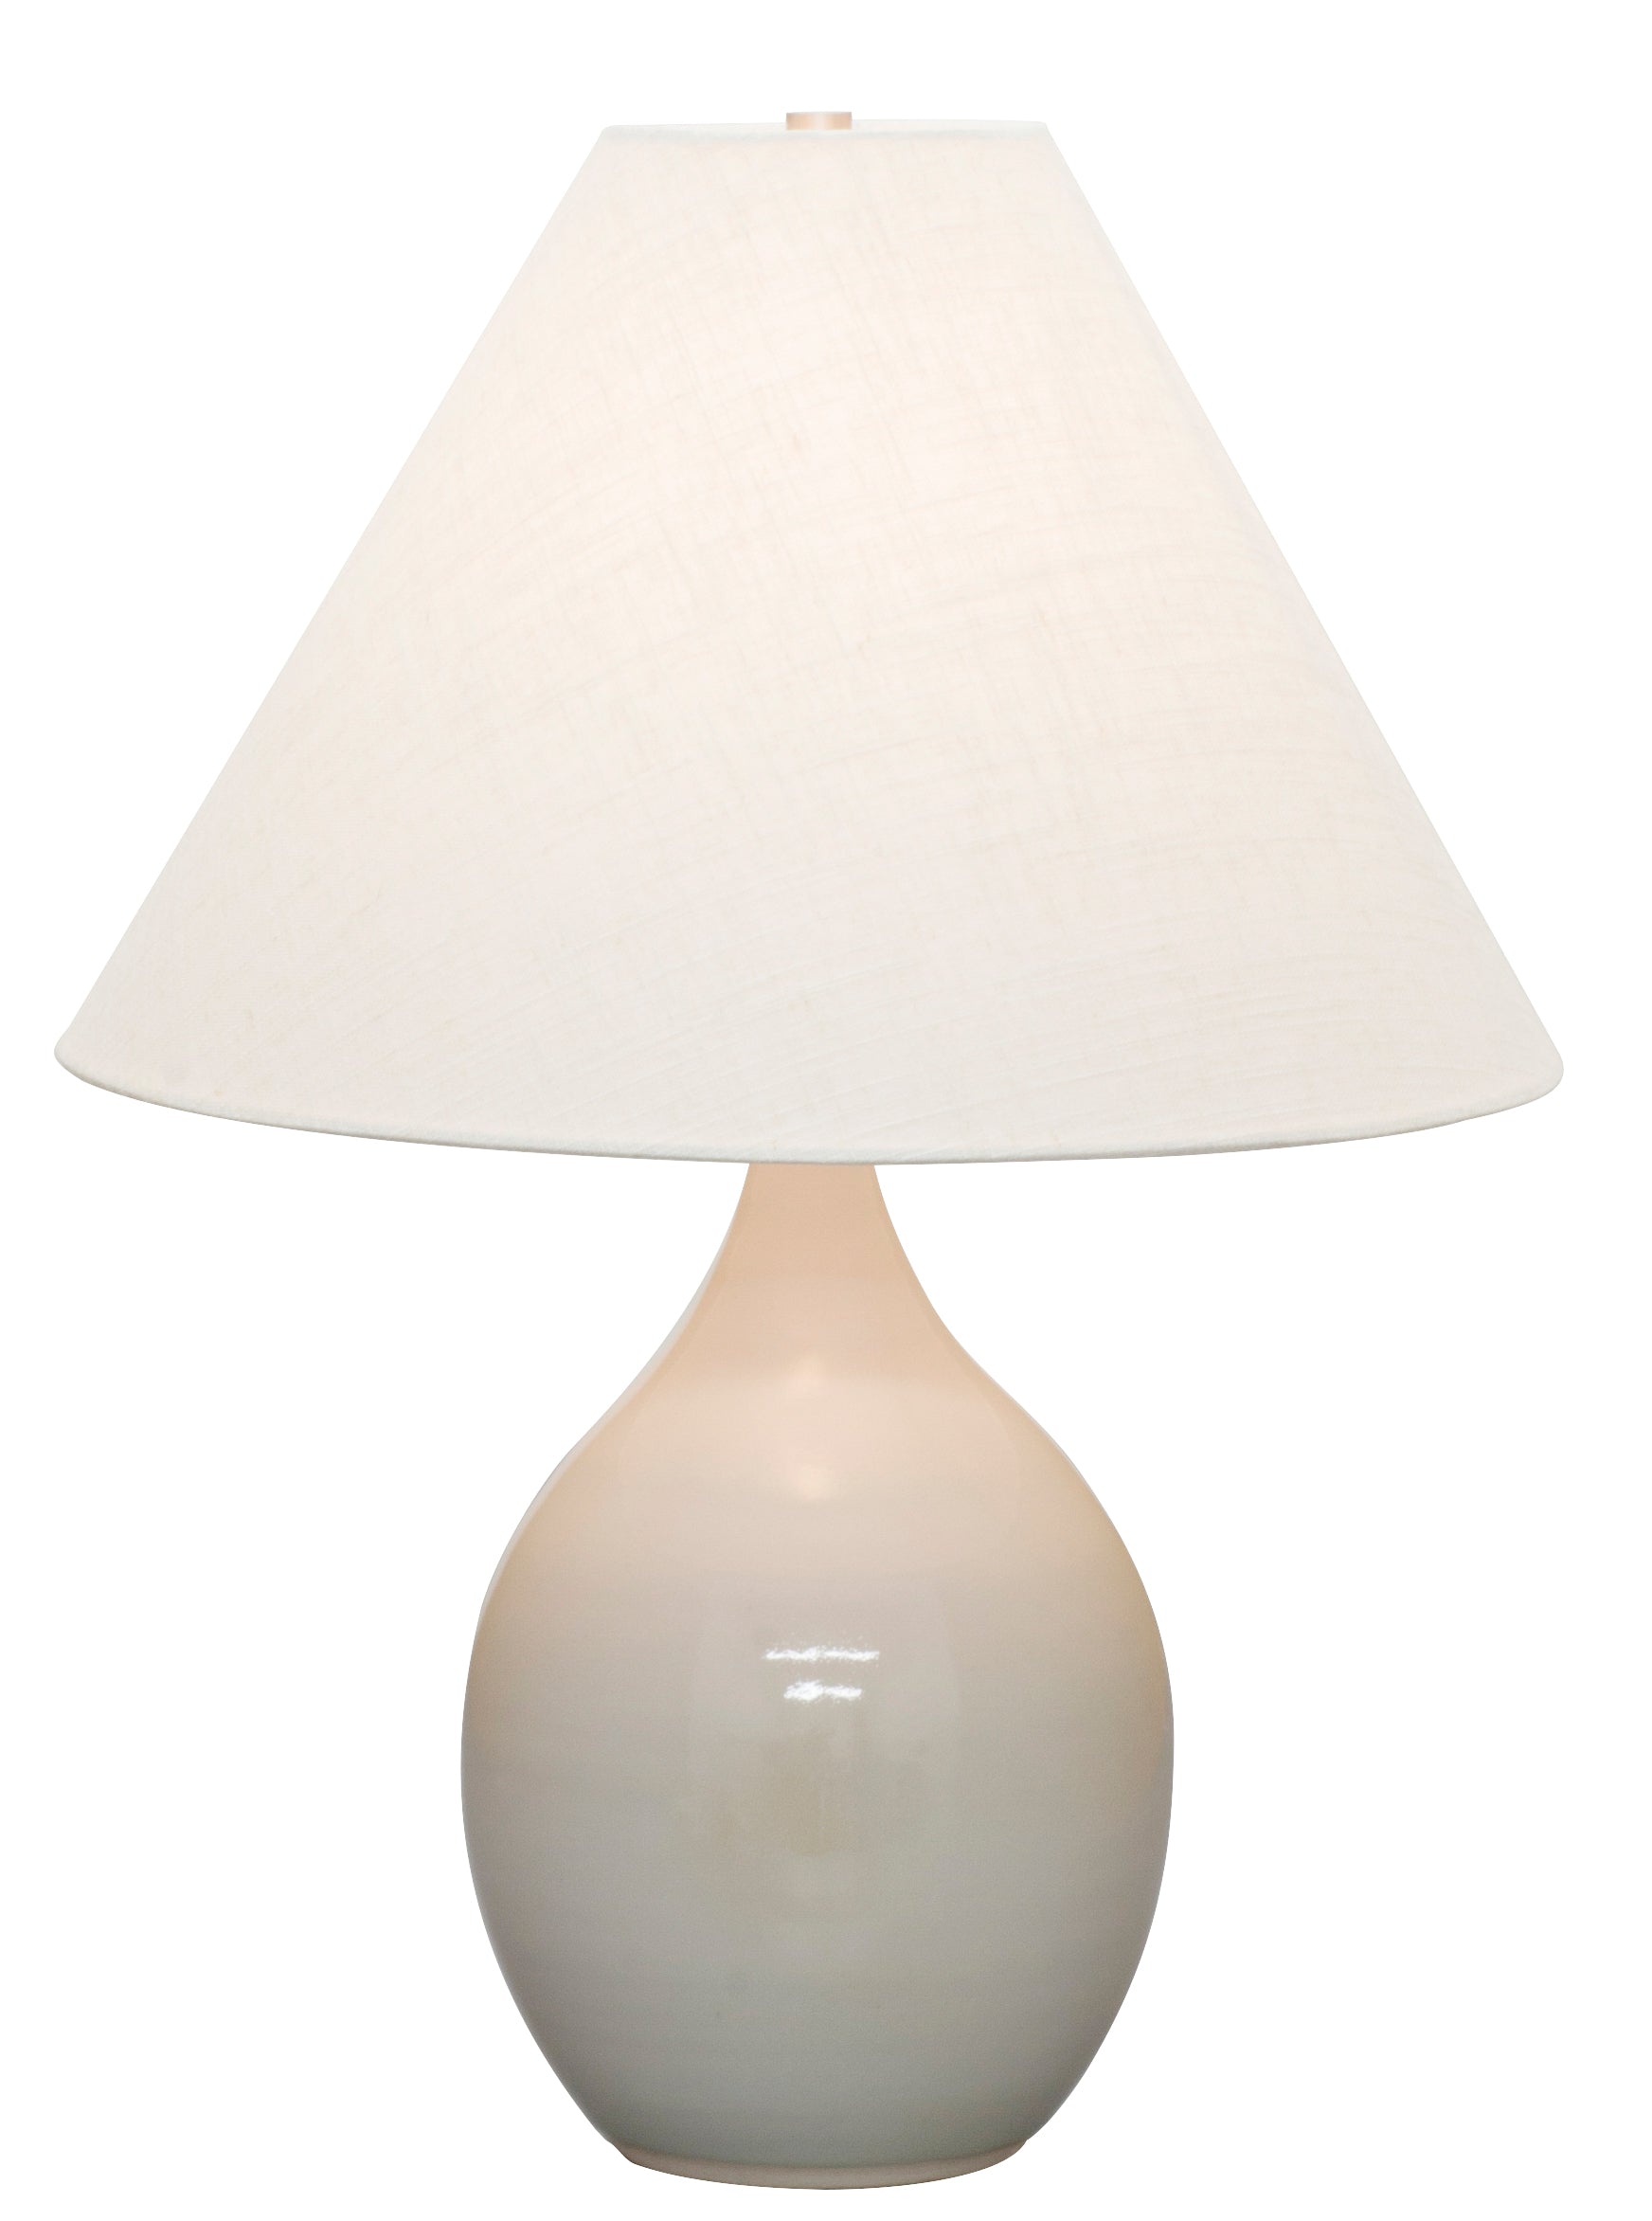 House of Troy Scatchard 22.5" Stoneware Table Lamp in Gray Gloss GS300-GG